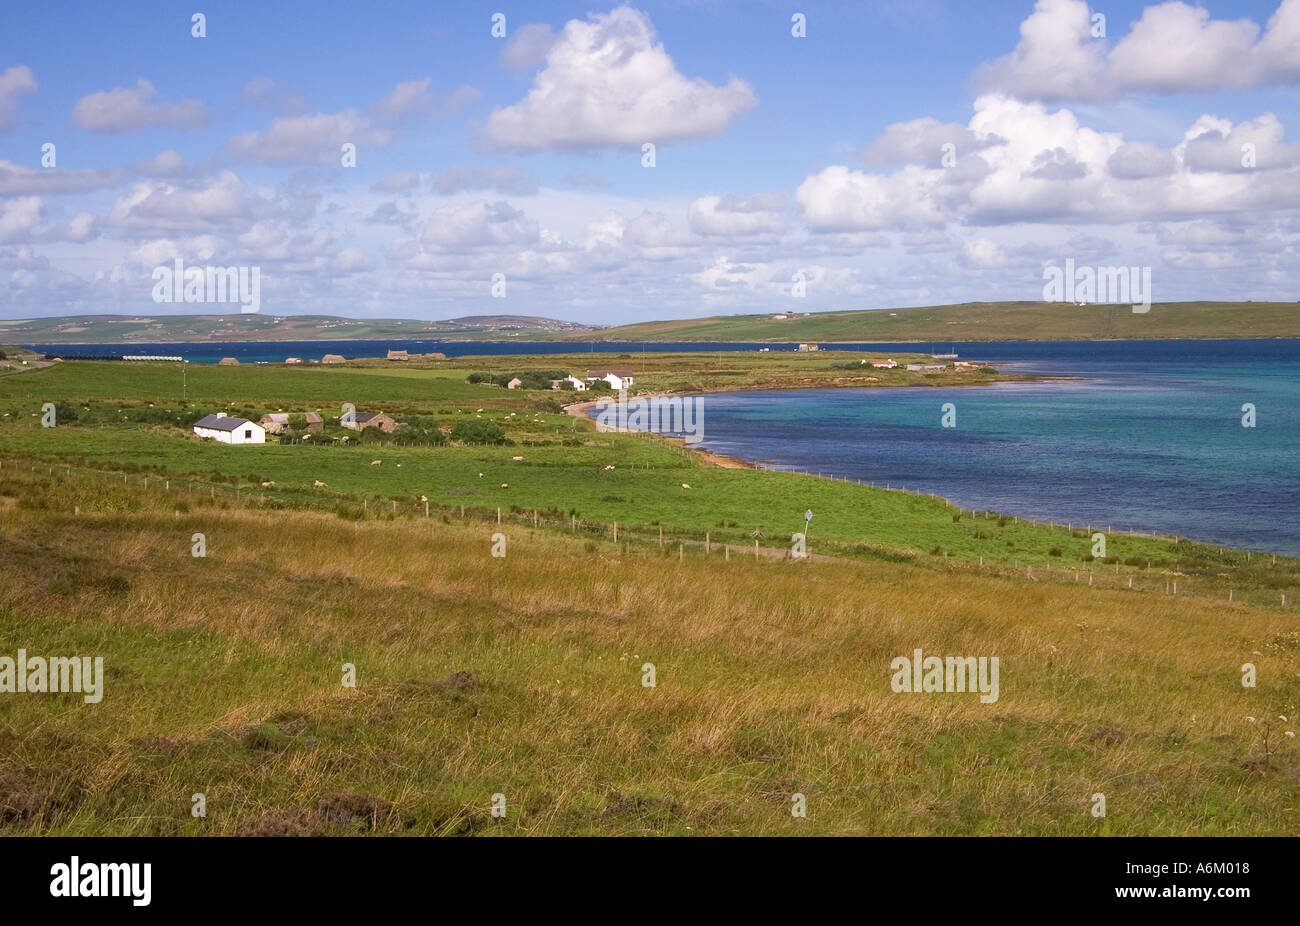 dh Bay of Quoys HOY ORKNEY Grassy fields houses Burra Sound and Graemsay island remote getaway country scene far away scapa flow croft Stock Photo